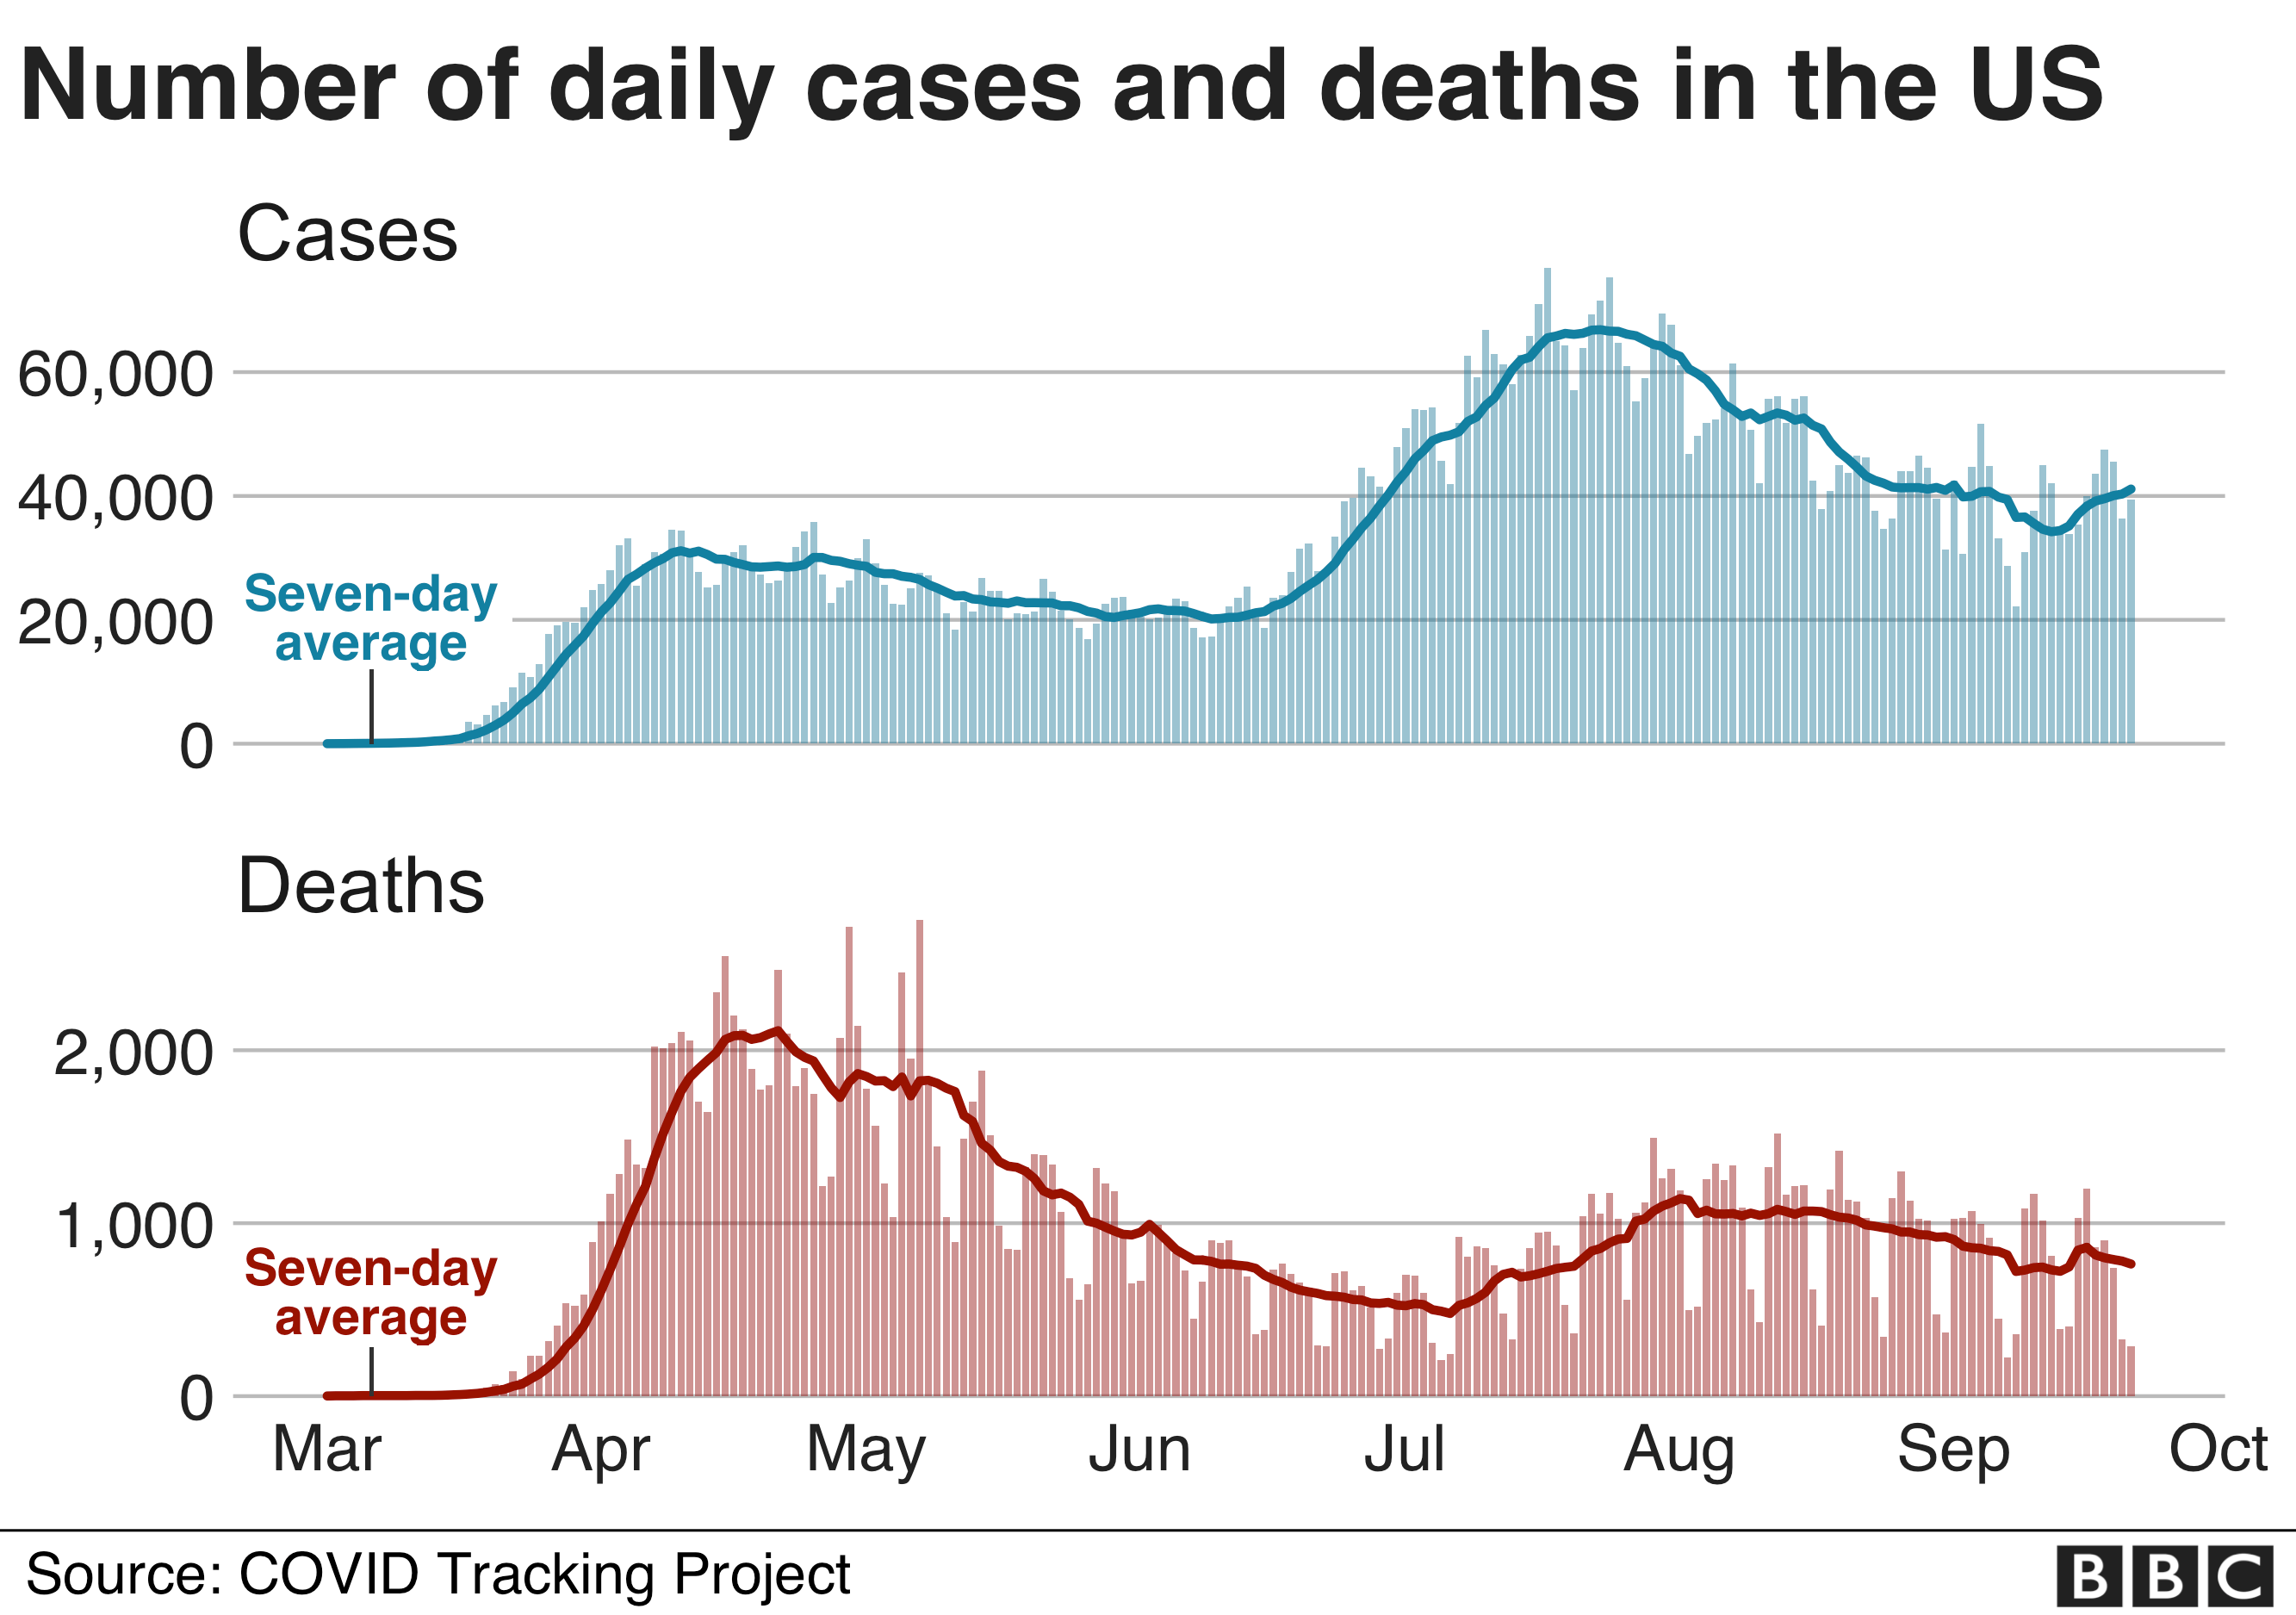 Graph showing number of daily coronavirus cases and deaths in the US